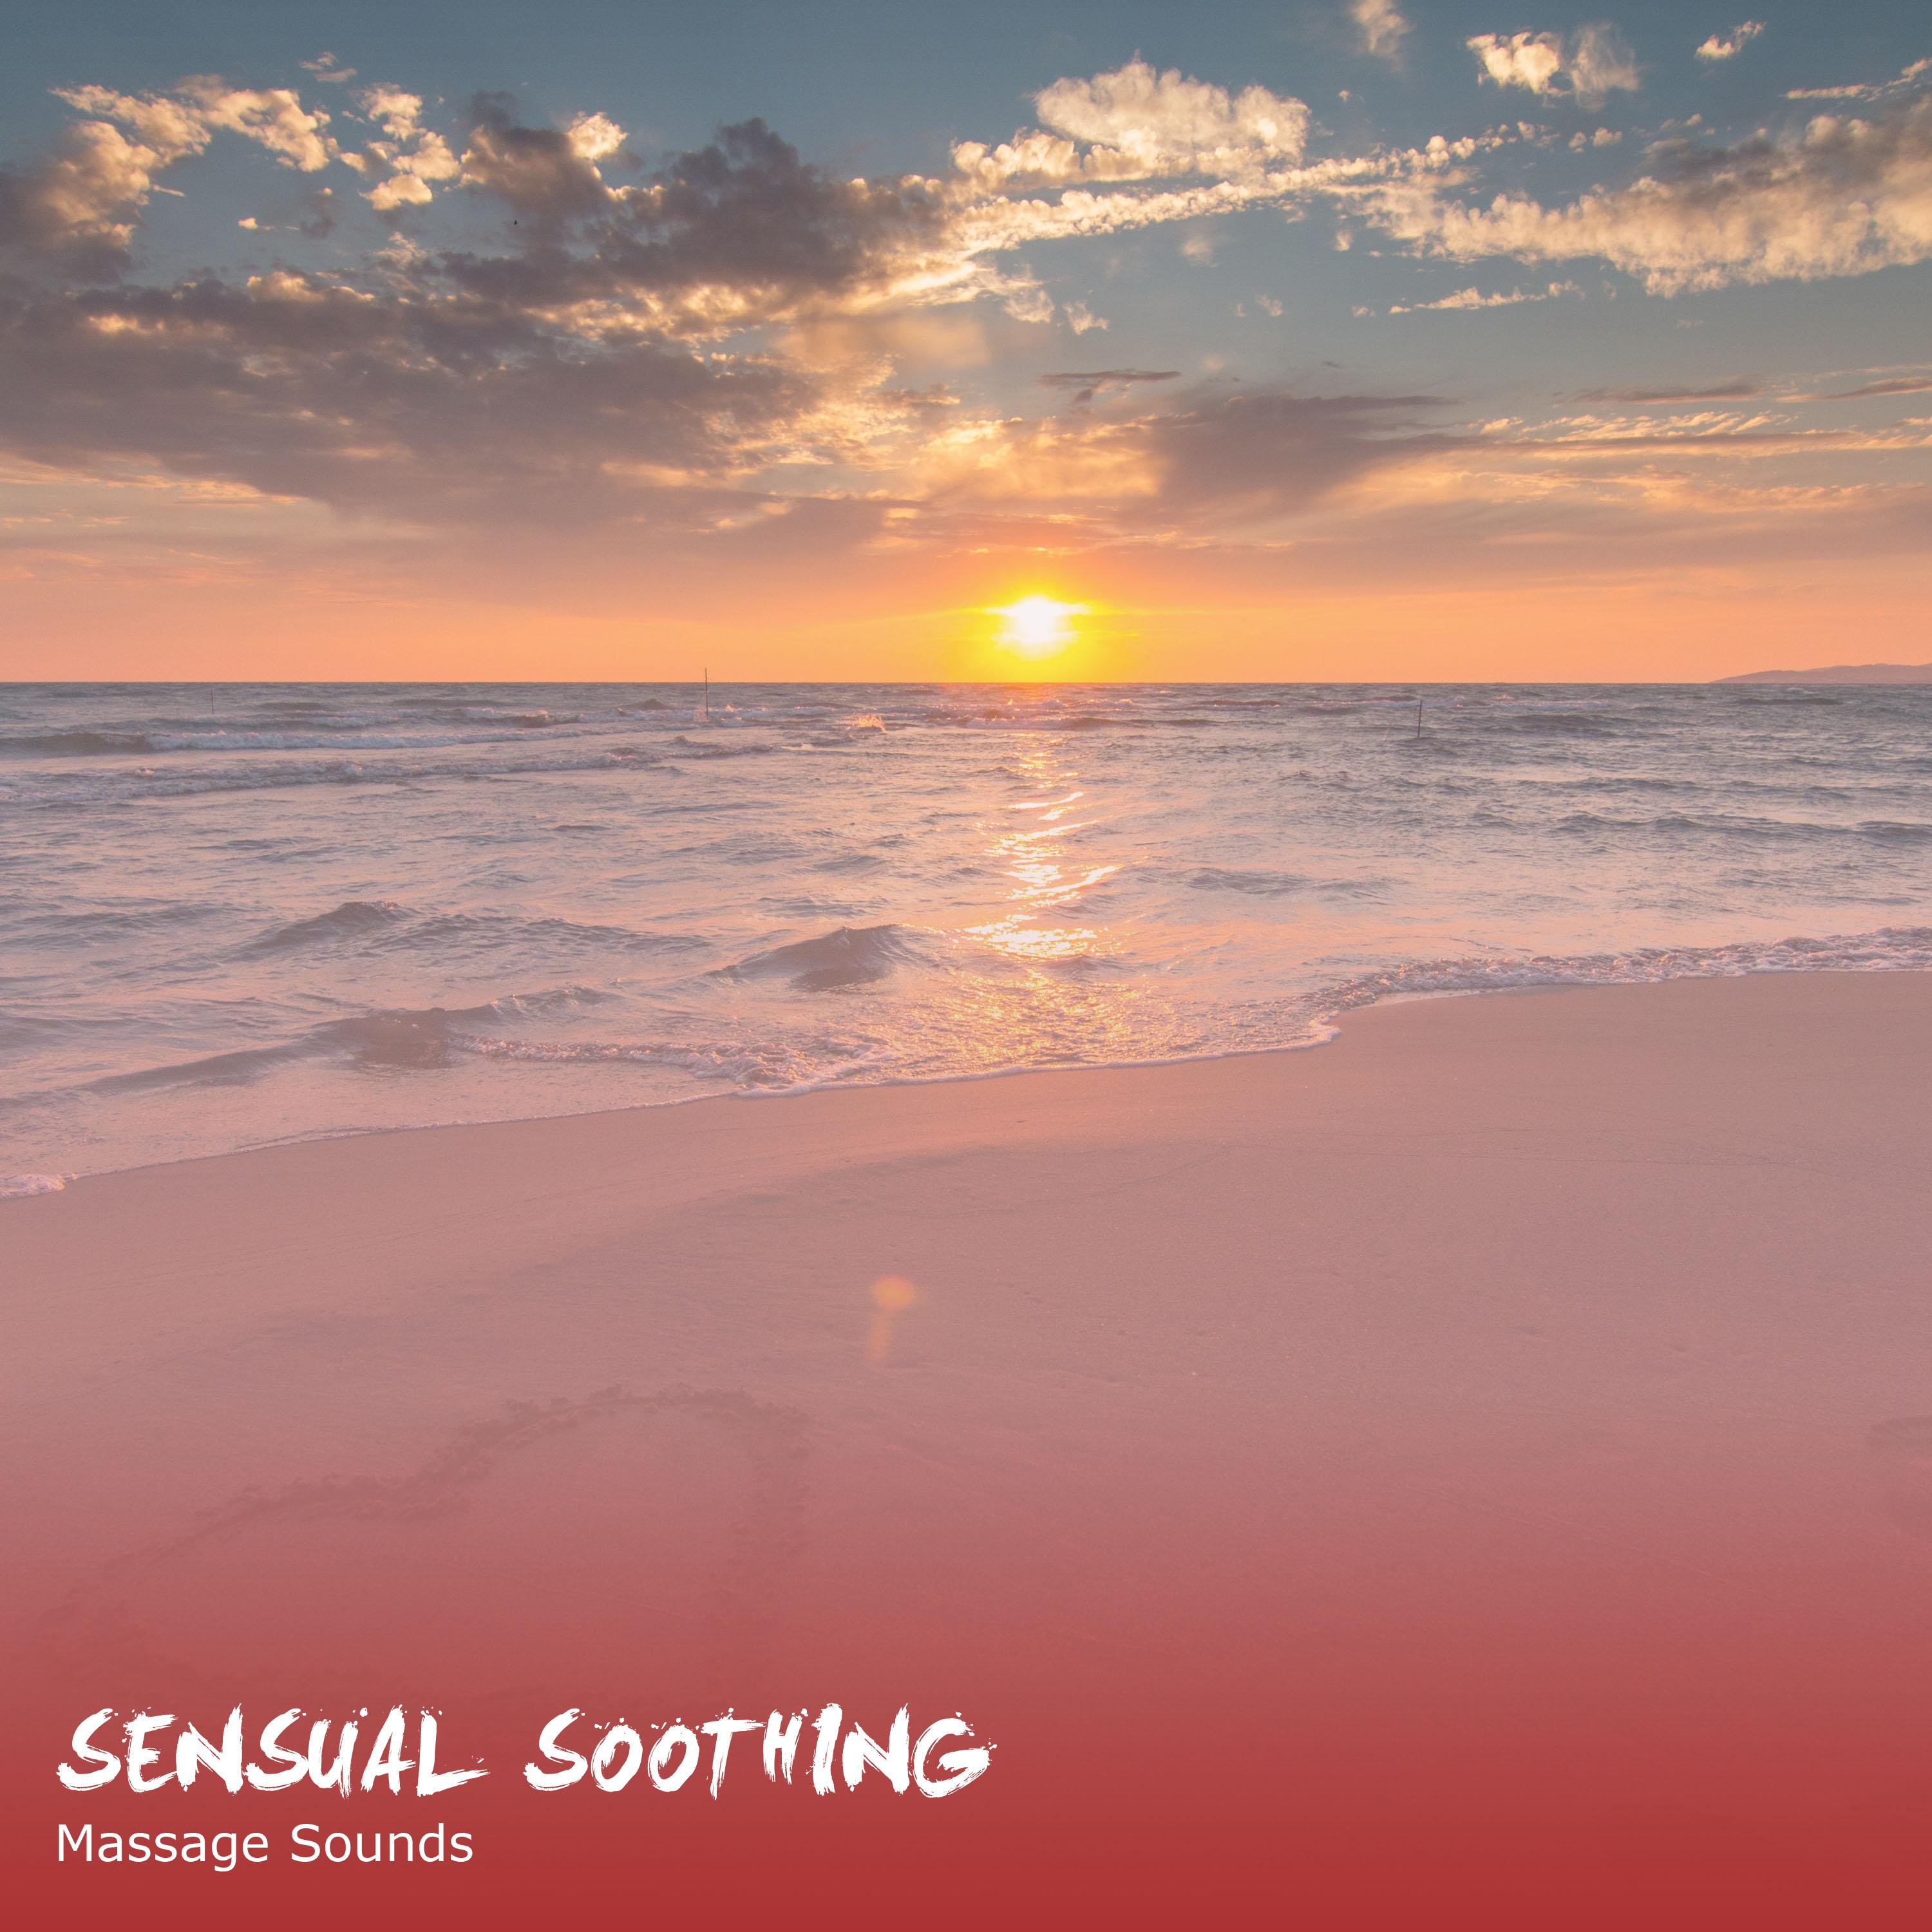 15 Sensual Soothing Massage Sounds